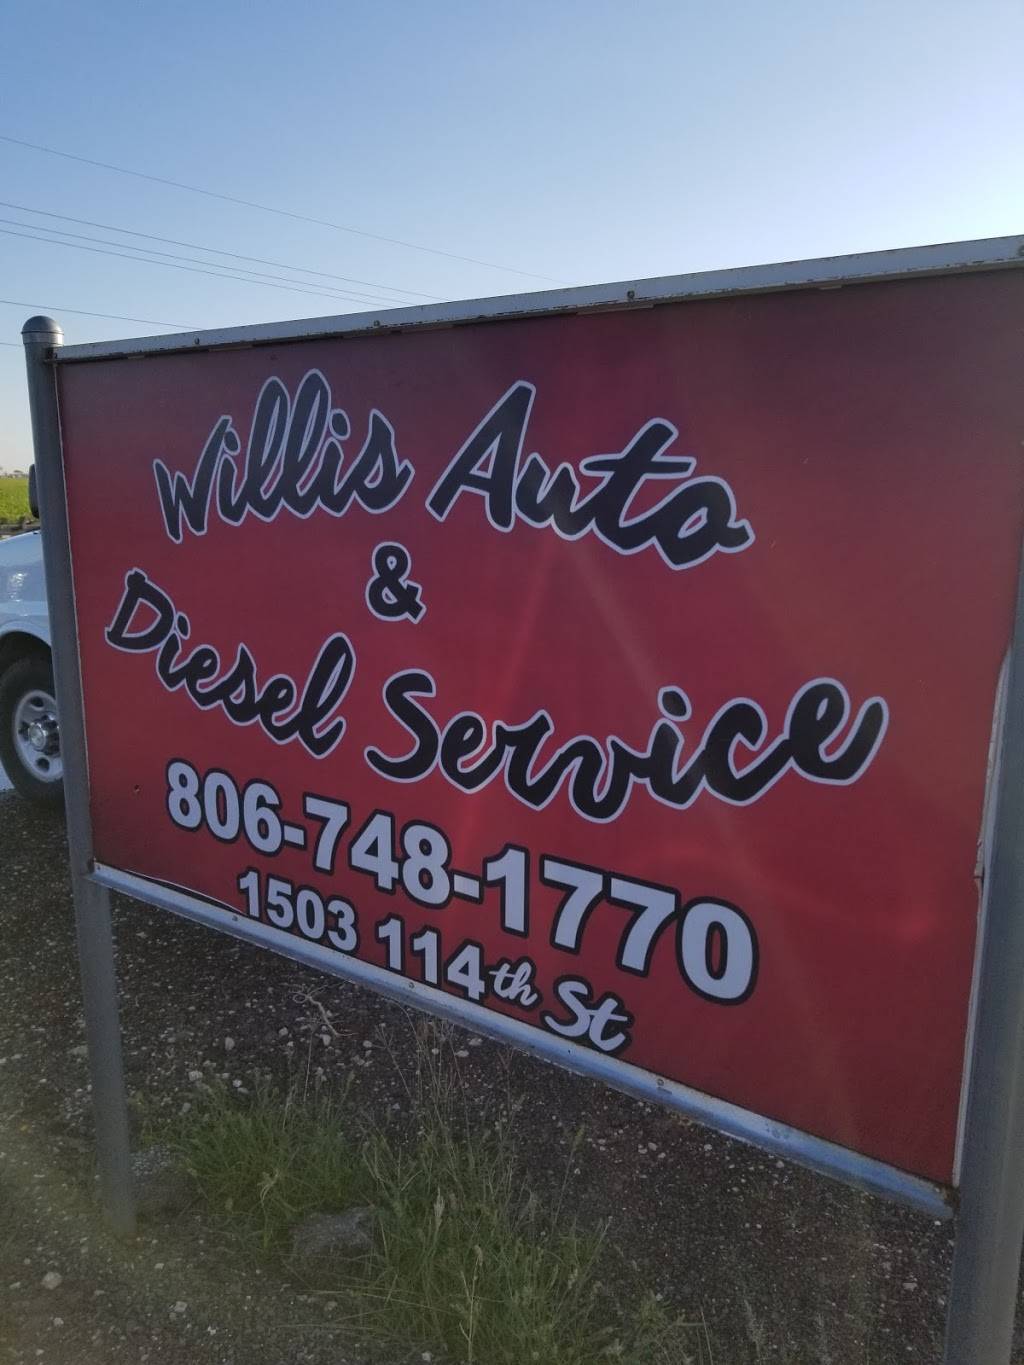 Willis Auto and Diesel Service LLC | 1503 114th St, Lubbock, TX 79423, USA | Phone: (806) 748-1770